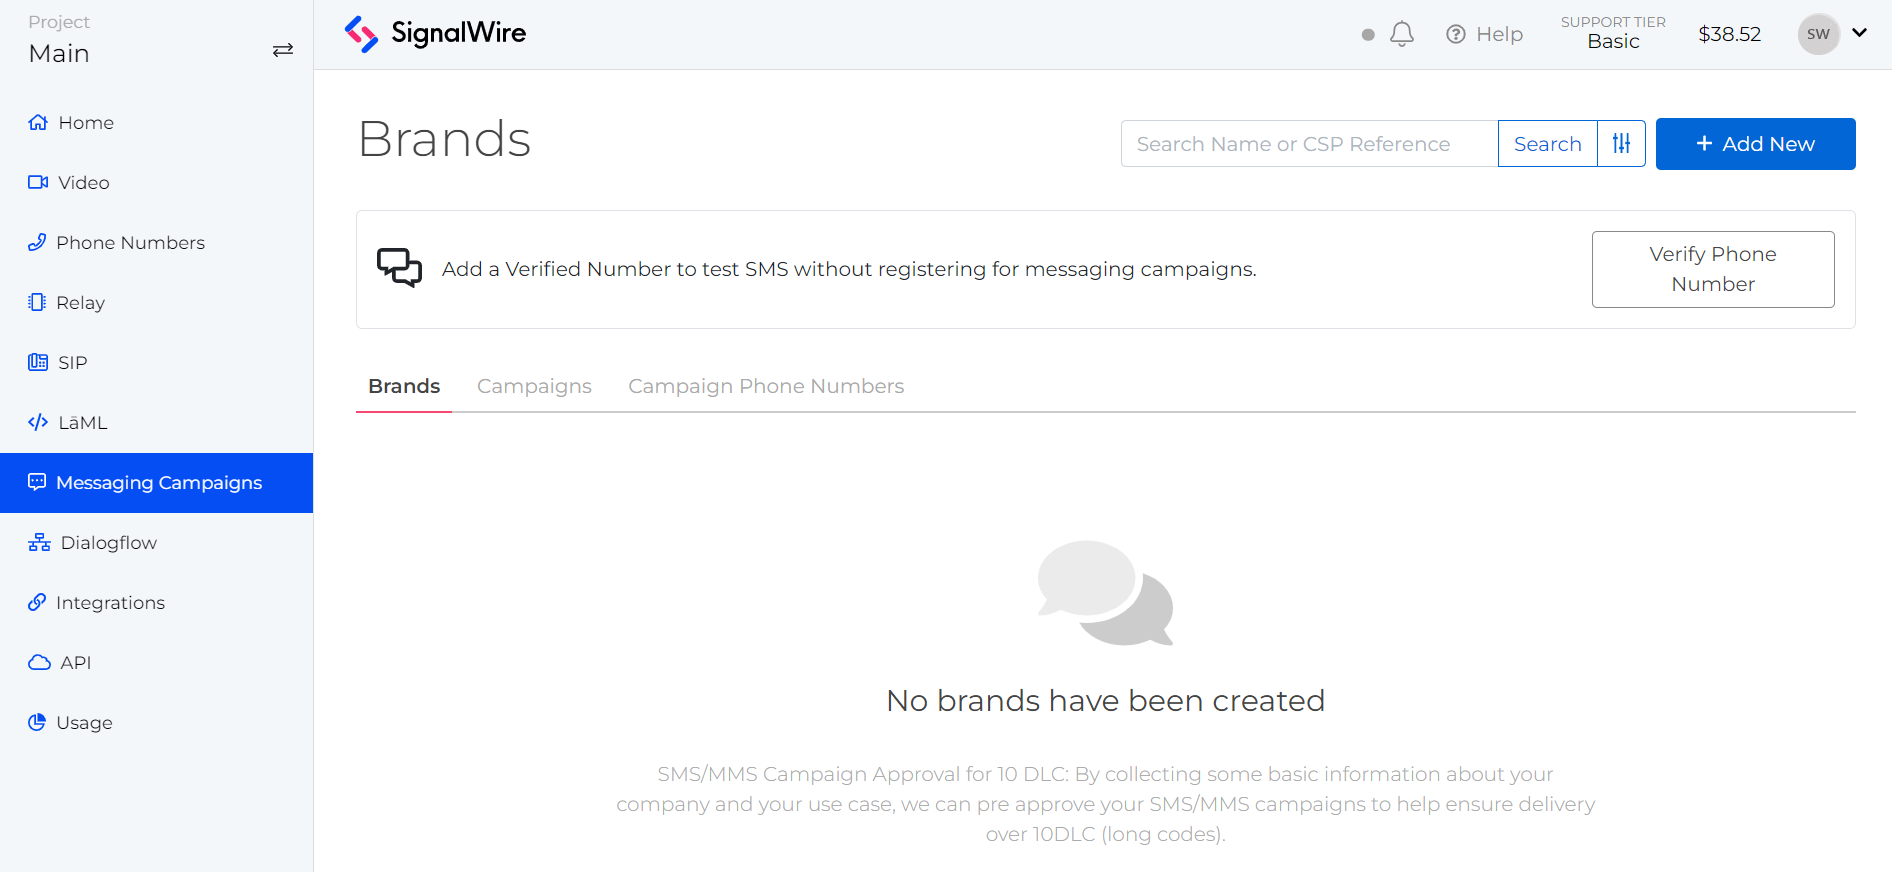 A screenshot of the Messaging Campaigns page in a SignalWire Space. The Brands tab is selected, and a dialog prompts the user to 'Add a Verified Number to test SMS without registering for messaging campaigns.'